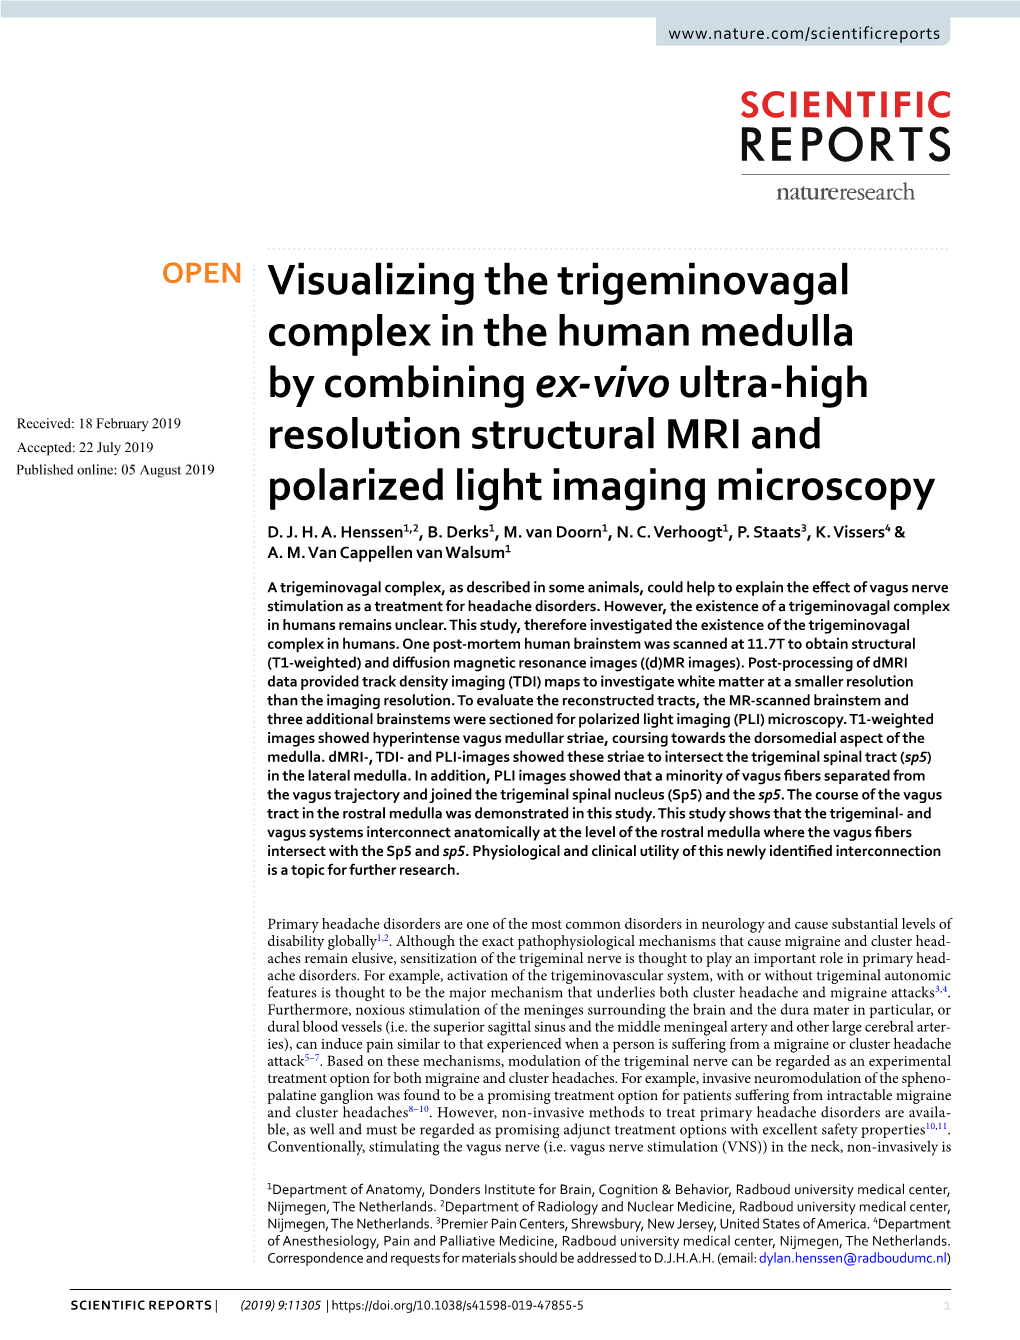 Visualizing the Trigeminovagal Complex in the Human Medulla By